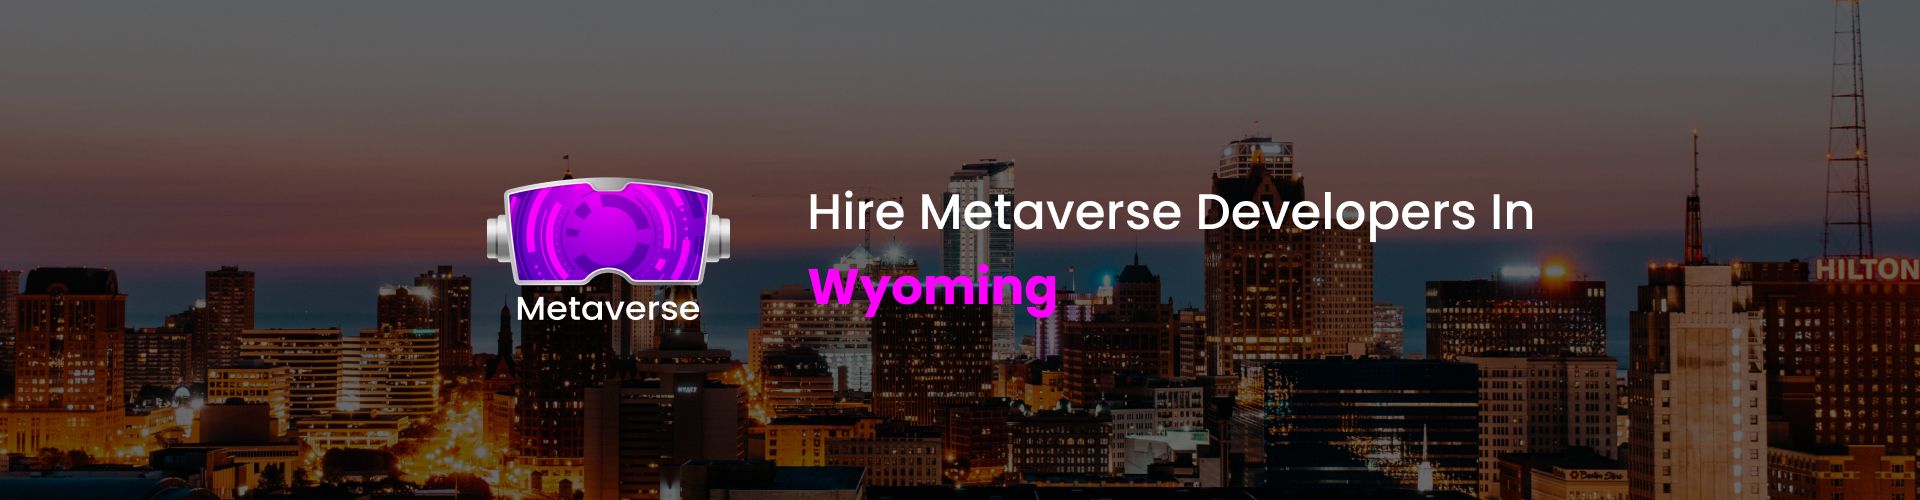 hire metaverse developers in wyoming